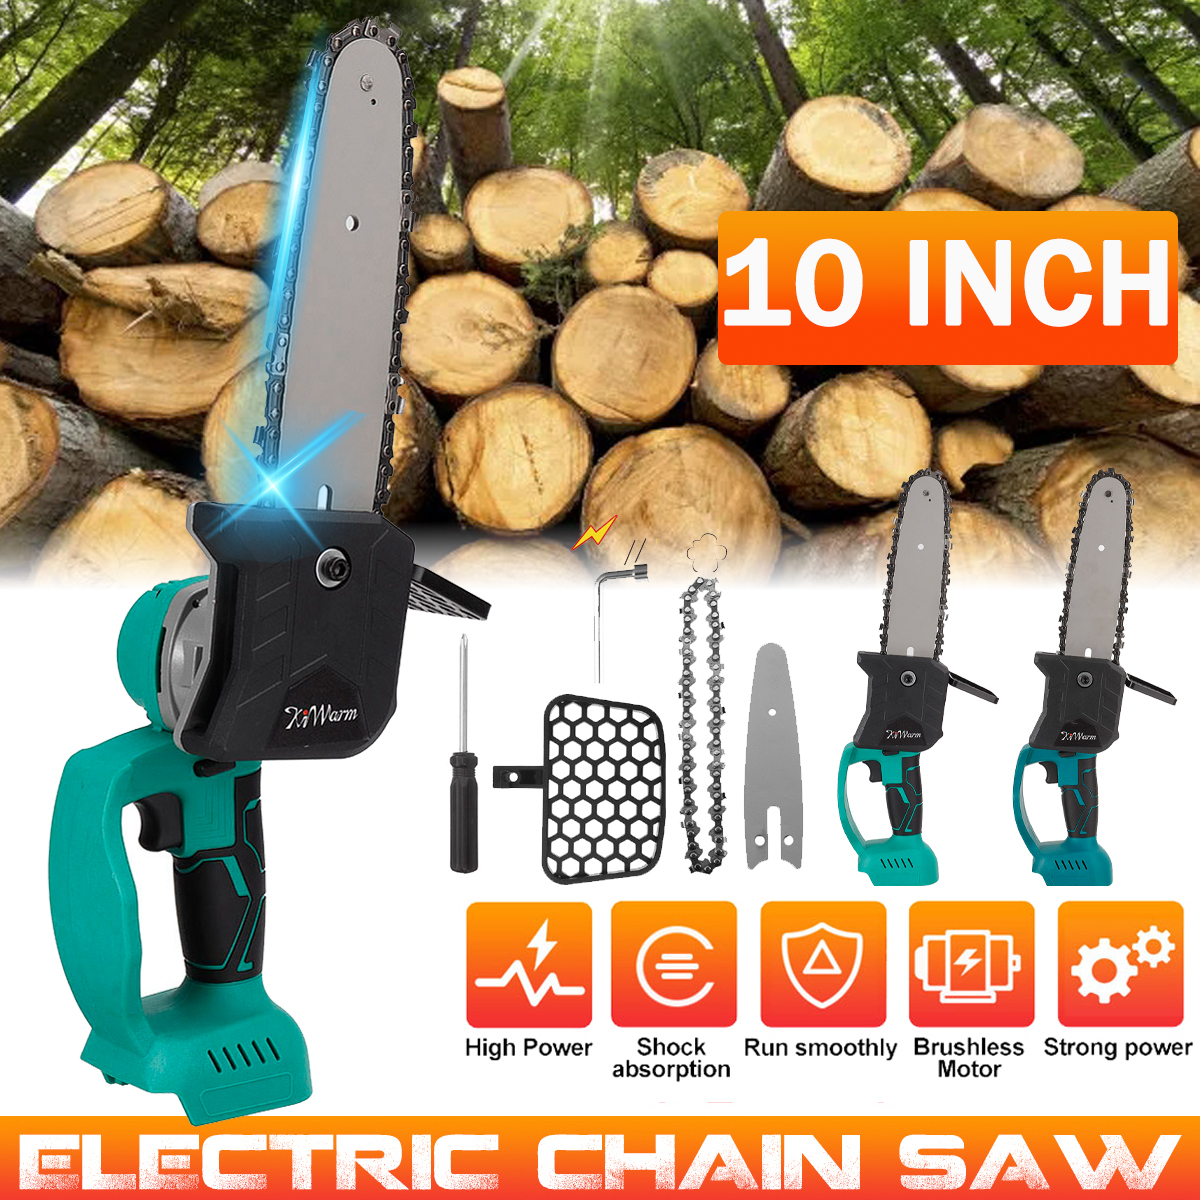 KIWARM-10-Inch-Portable-Electric-Saw-Pruning-Chain-Saw-Rechargeable-Woodworking-Power-Tools-Wood-Cut-1918536-1